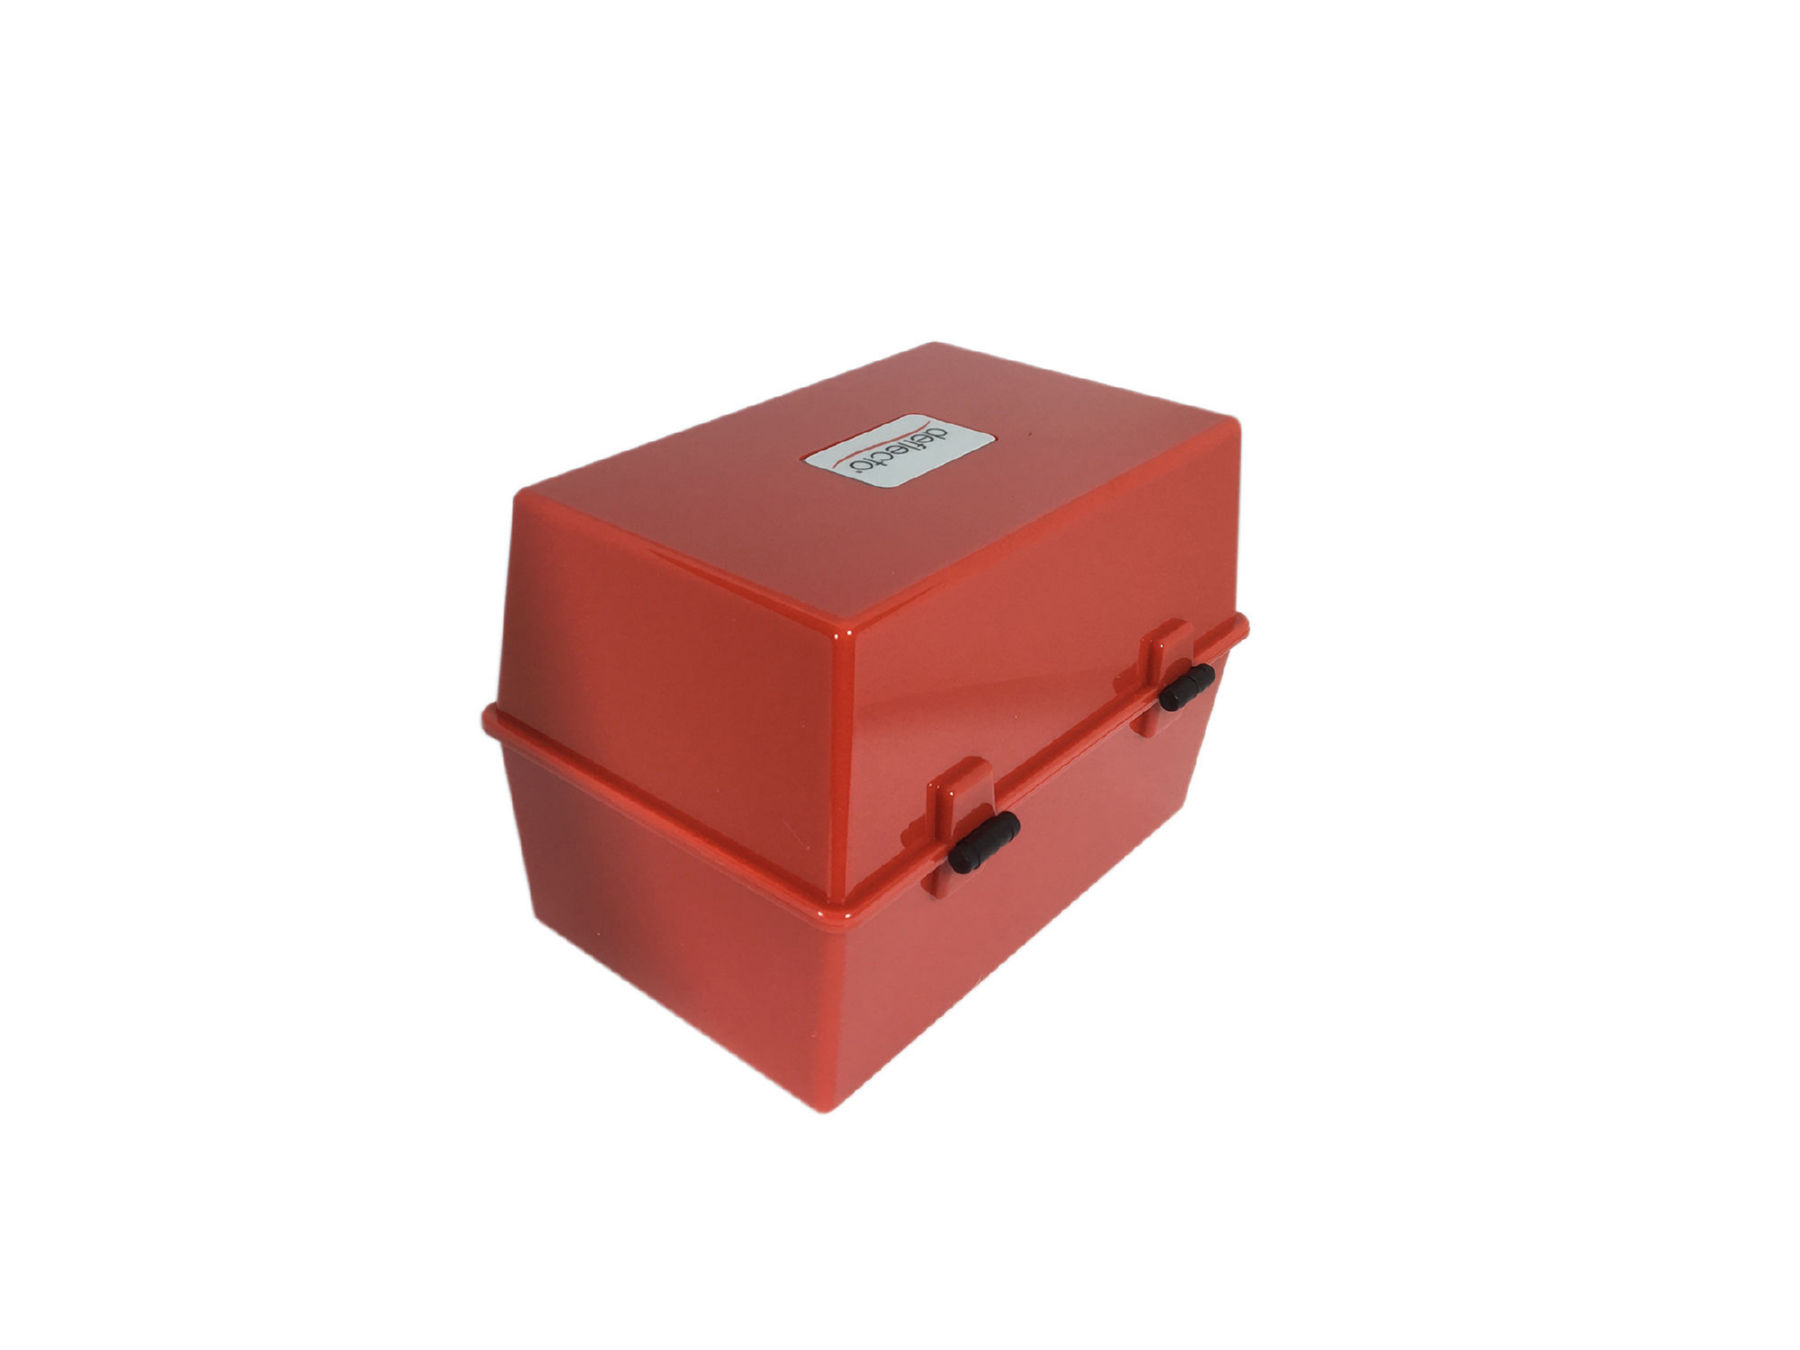 ValueX Deflecto Card Index Box 5x3 inches / 127x76mm Red